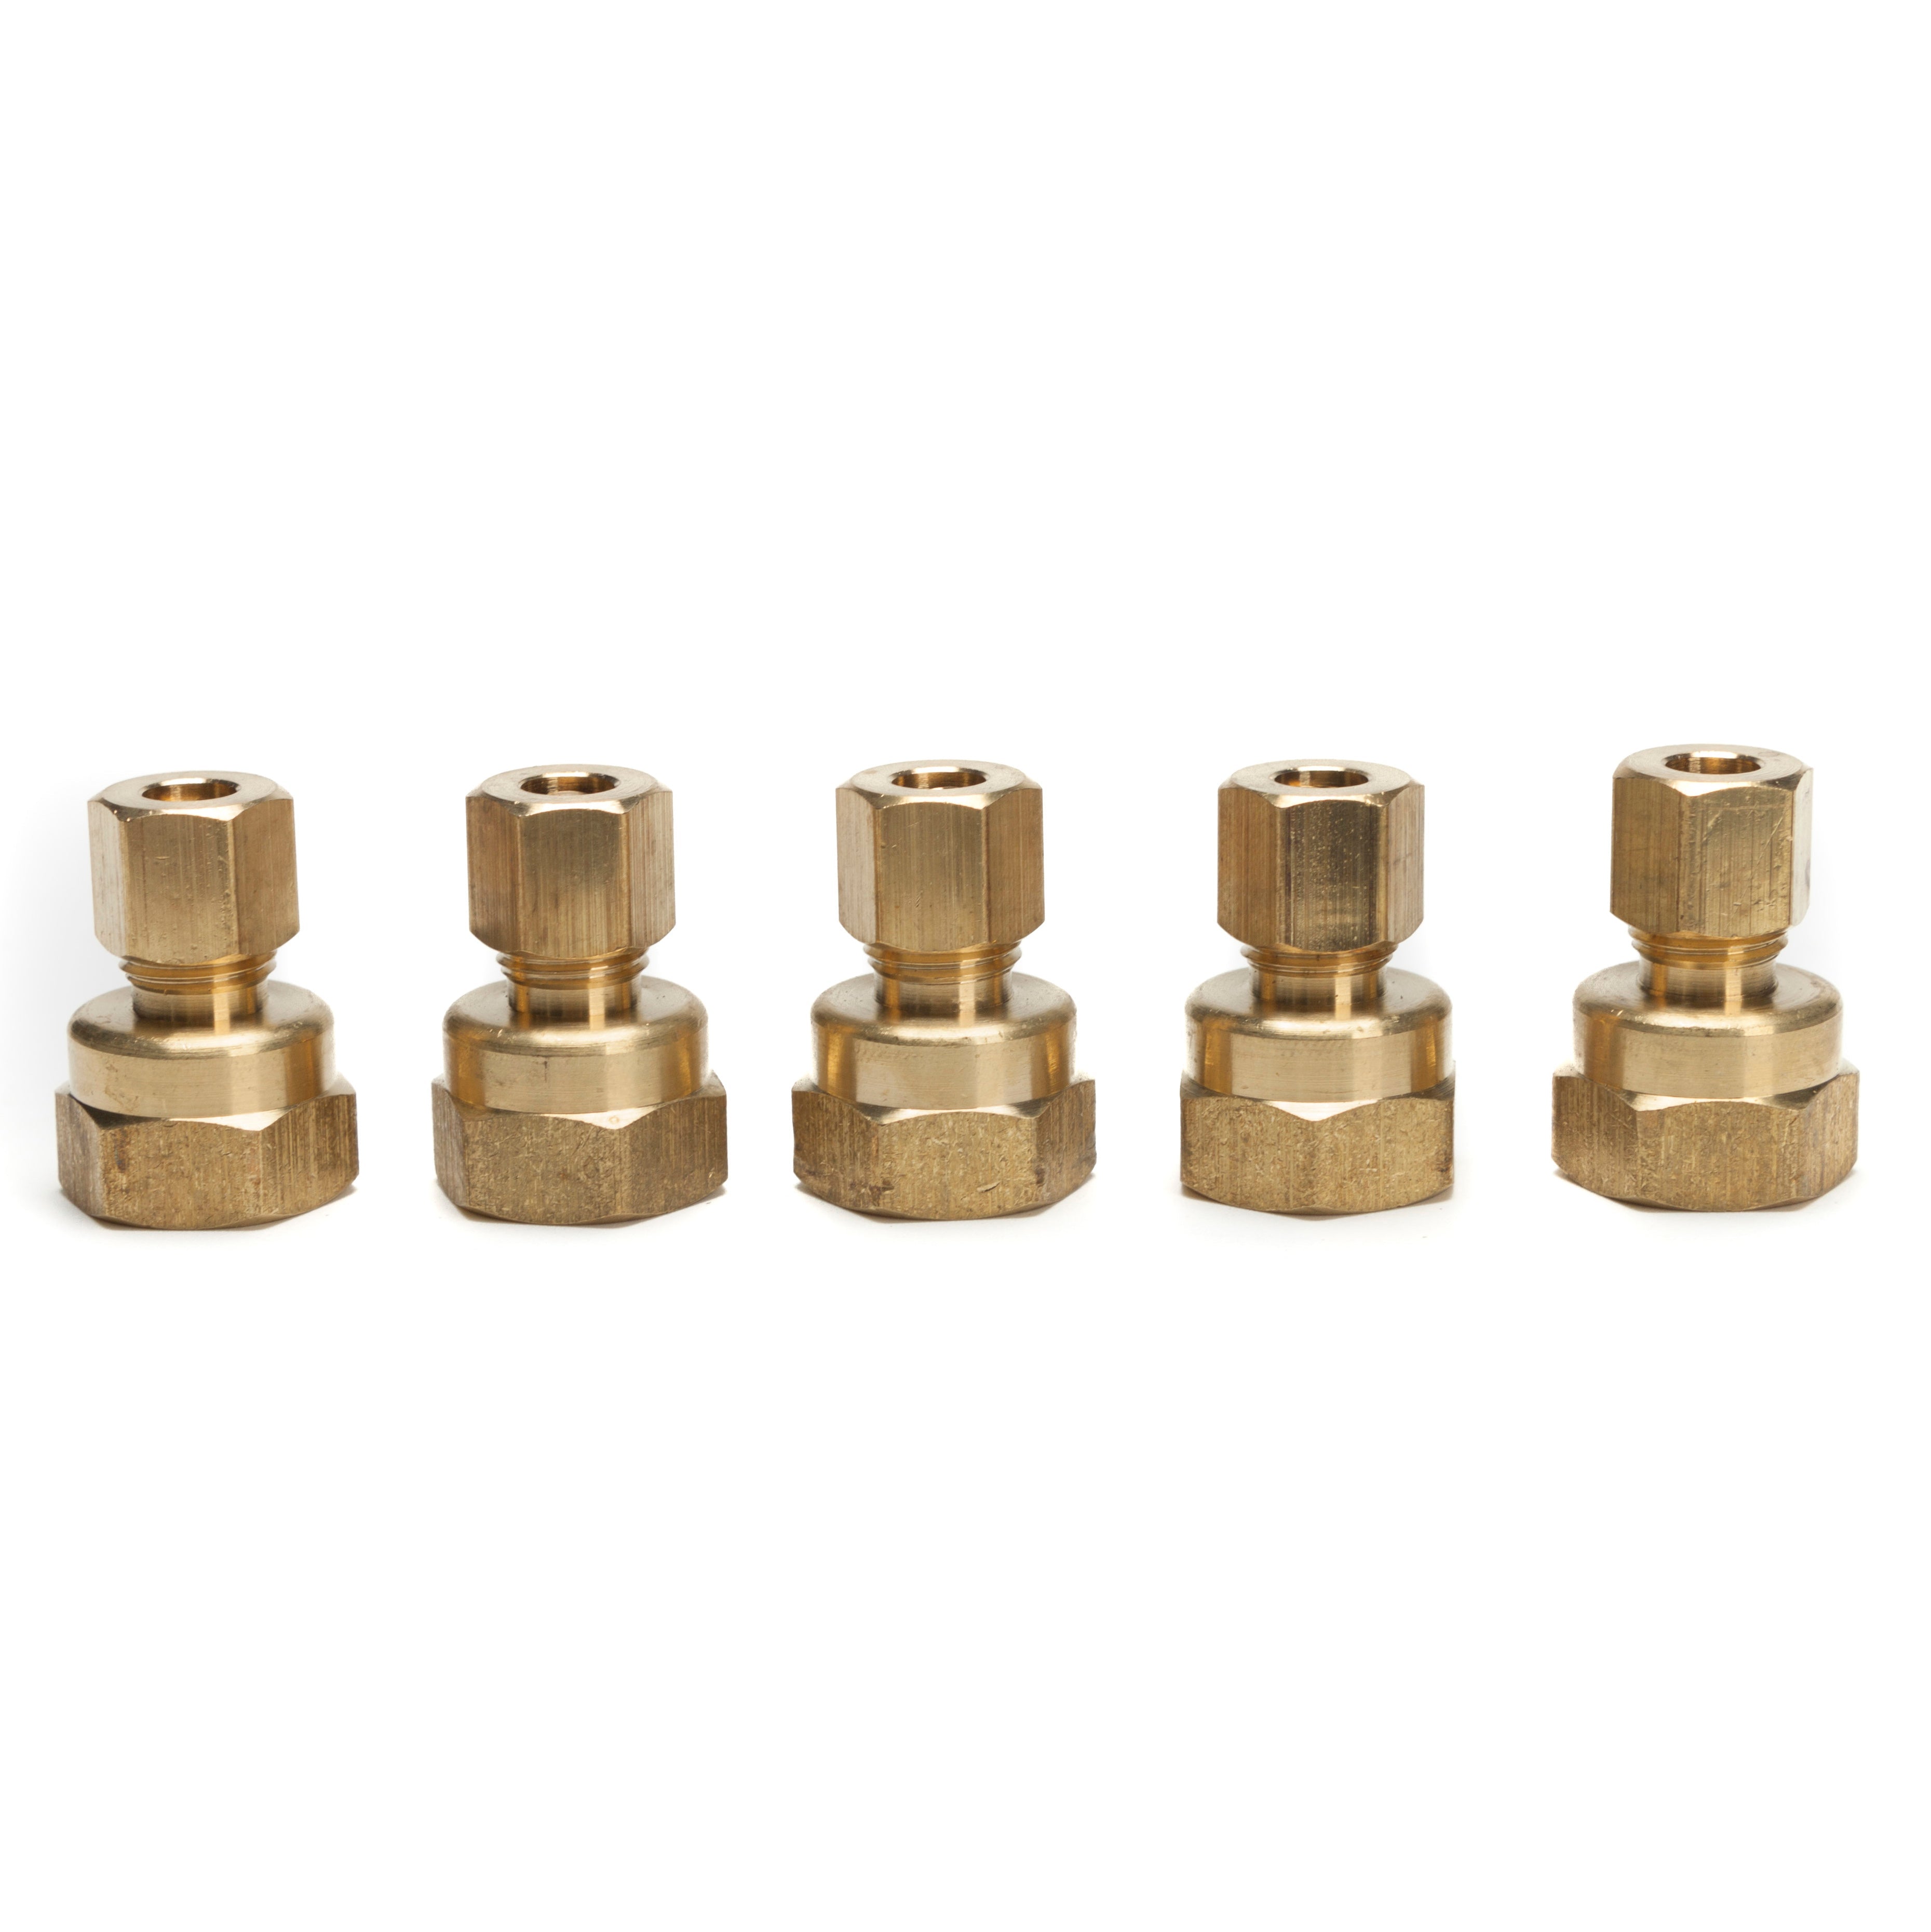 LTWFITTING Brass 1/4-Inch OD x 3/8-Inch Female NPT Compression Connector Fitting(Pack of 5)